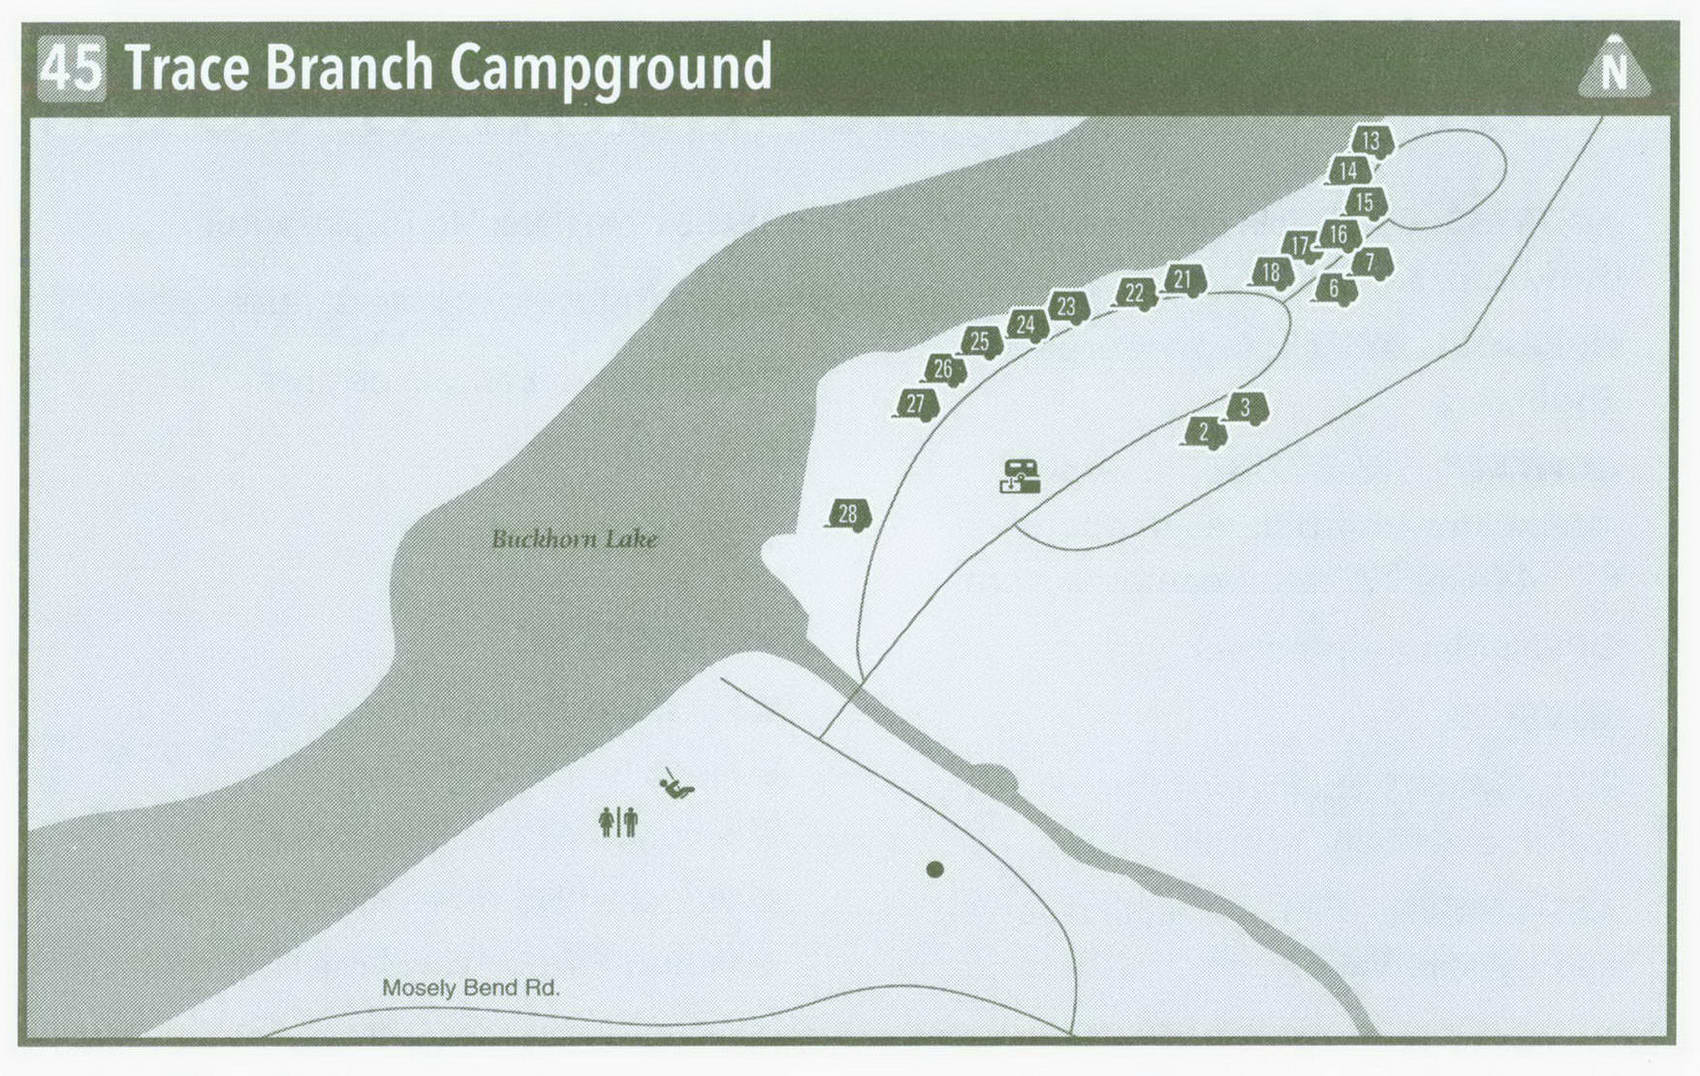 Plan of Tracp Branch Campground